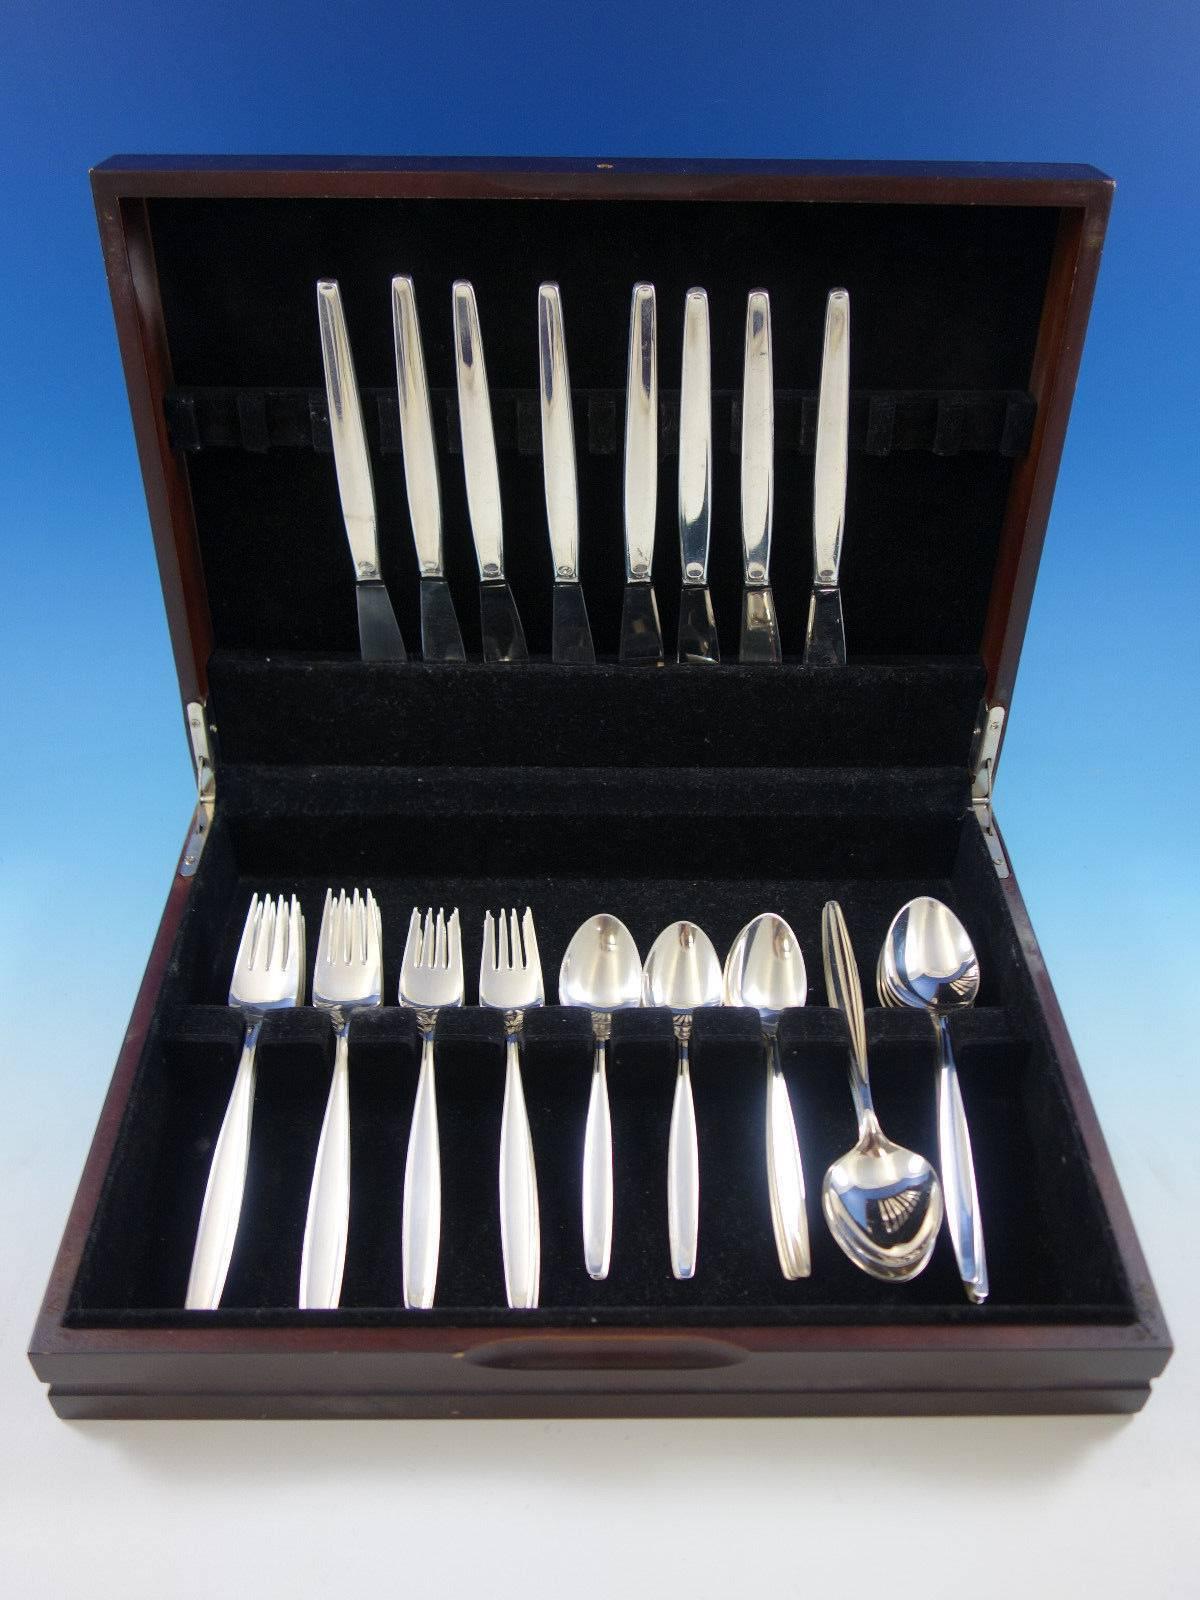 Dinner size Cypress by Georg Jensen Mid-Century Modern sterling silver flatware set - 40 pieces. This set includes: 

Eight dinner knives, 8 3/4